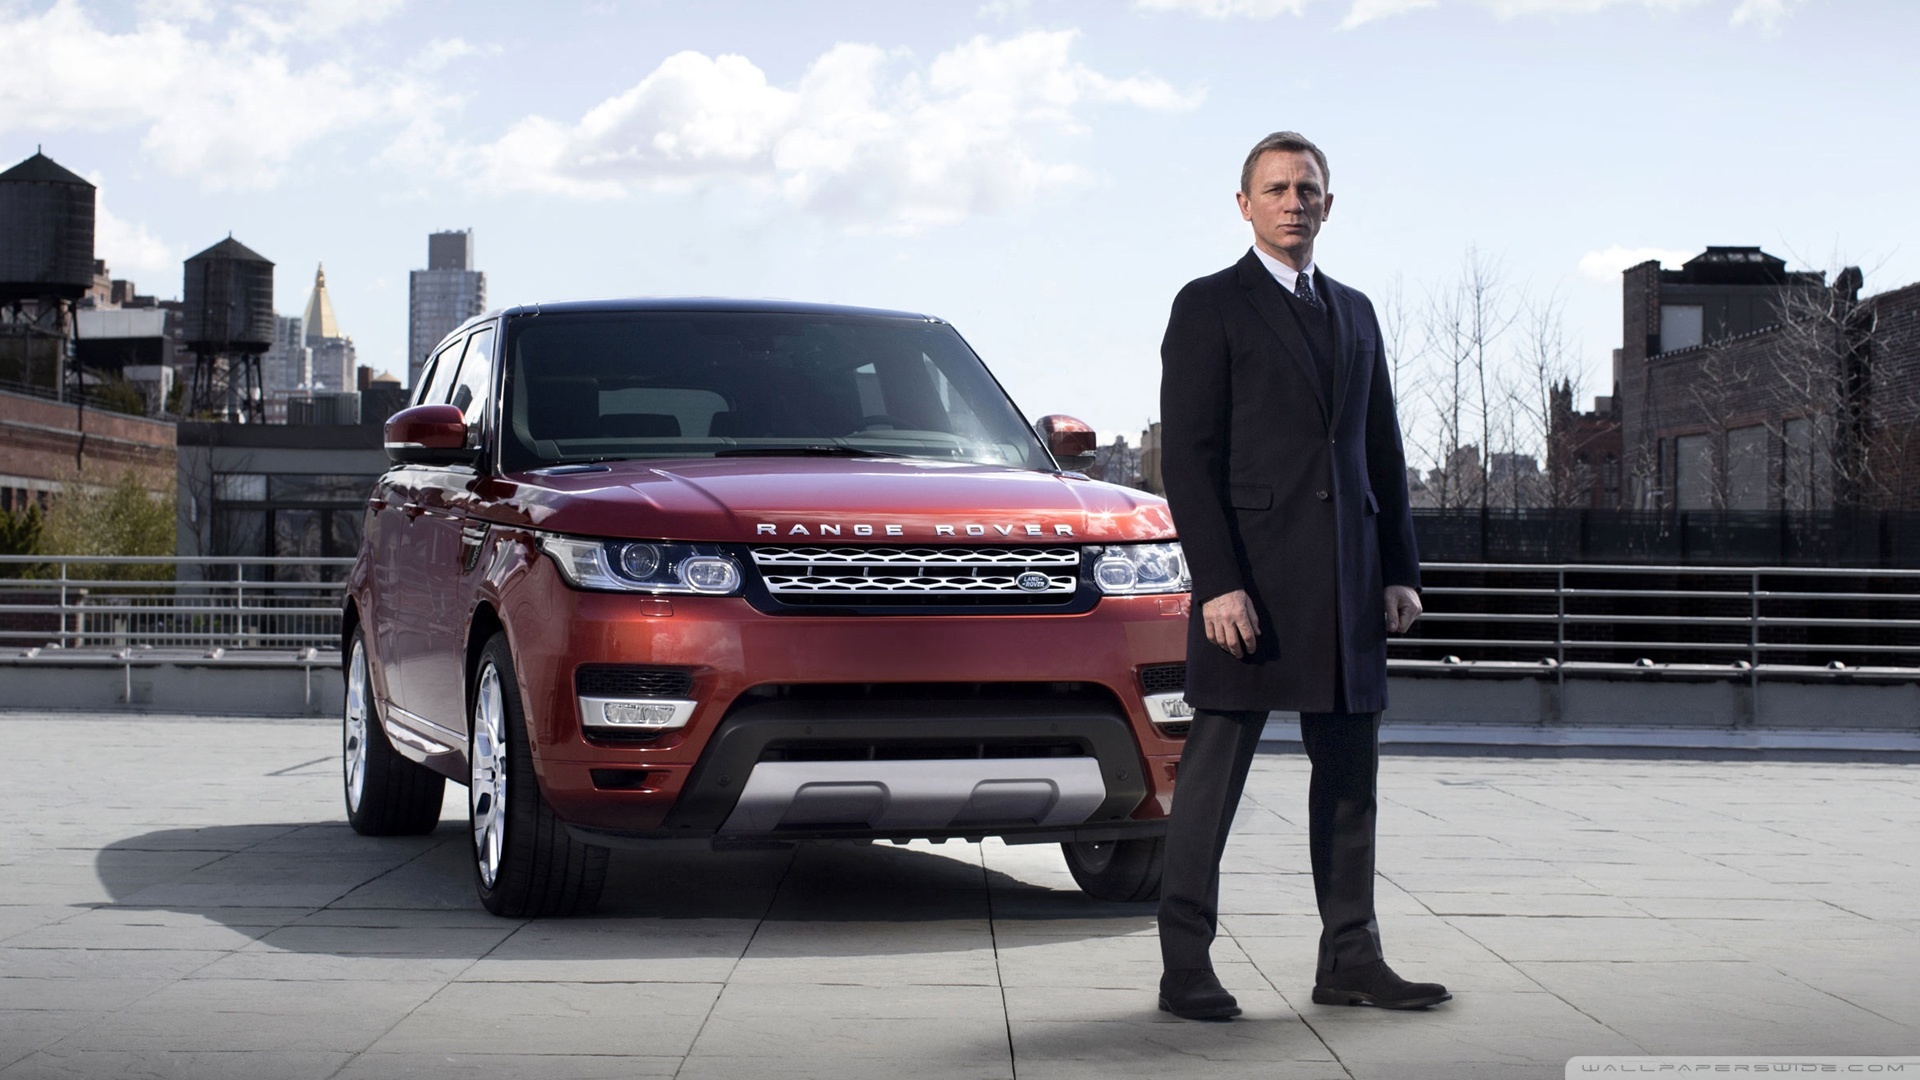 Related Wallpapers - Range Rover And Men , HD Wallpaper & Backgrounds